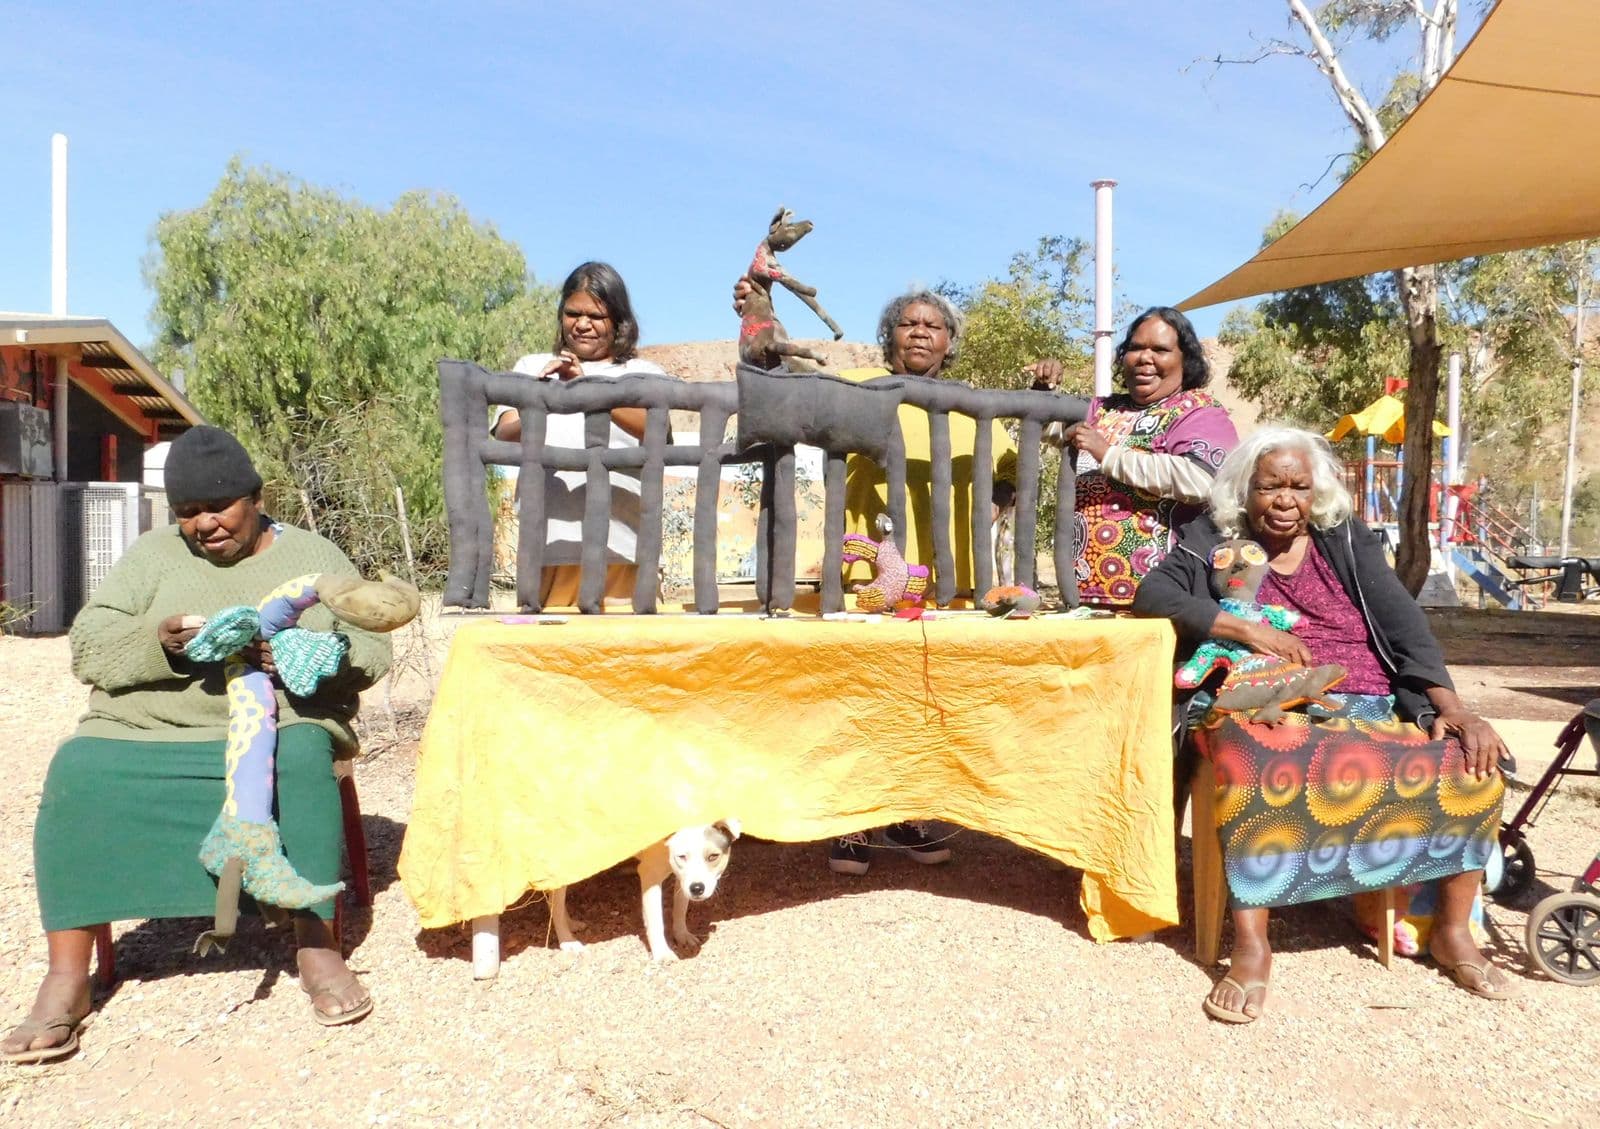 Five Indigenous Australian woman are sitting and standing around a table outside with a bright yellow tablecloth, with a sculpture of parliament house made in black material sitting on the table. A dog is peering out from under the tablecloth.